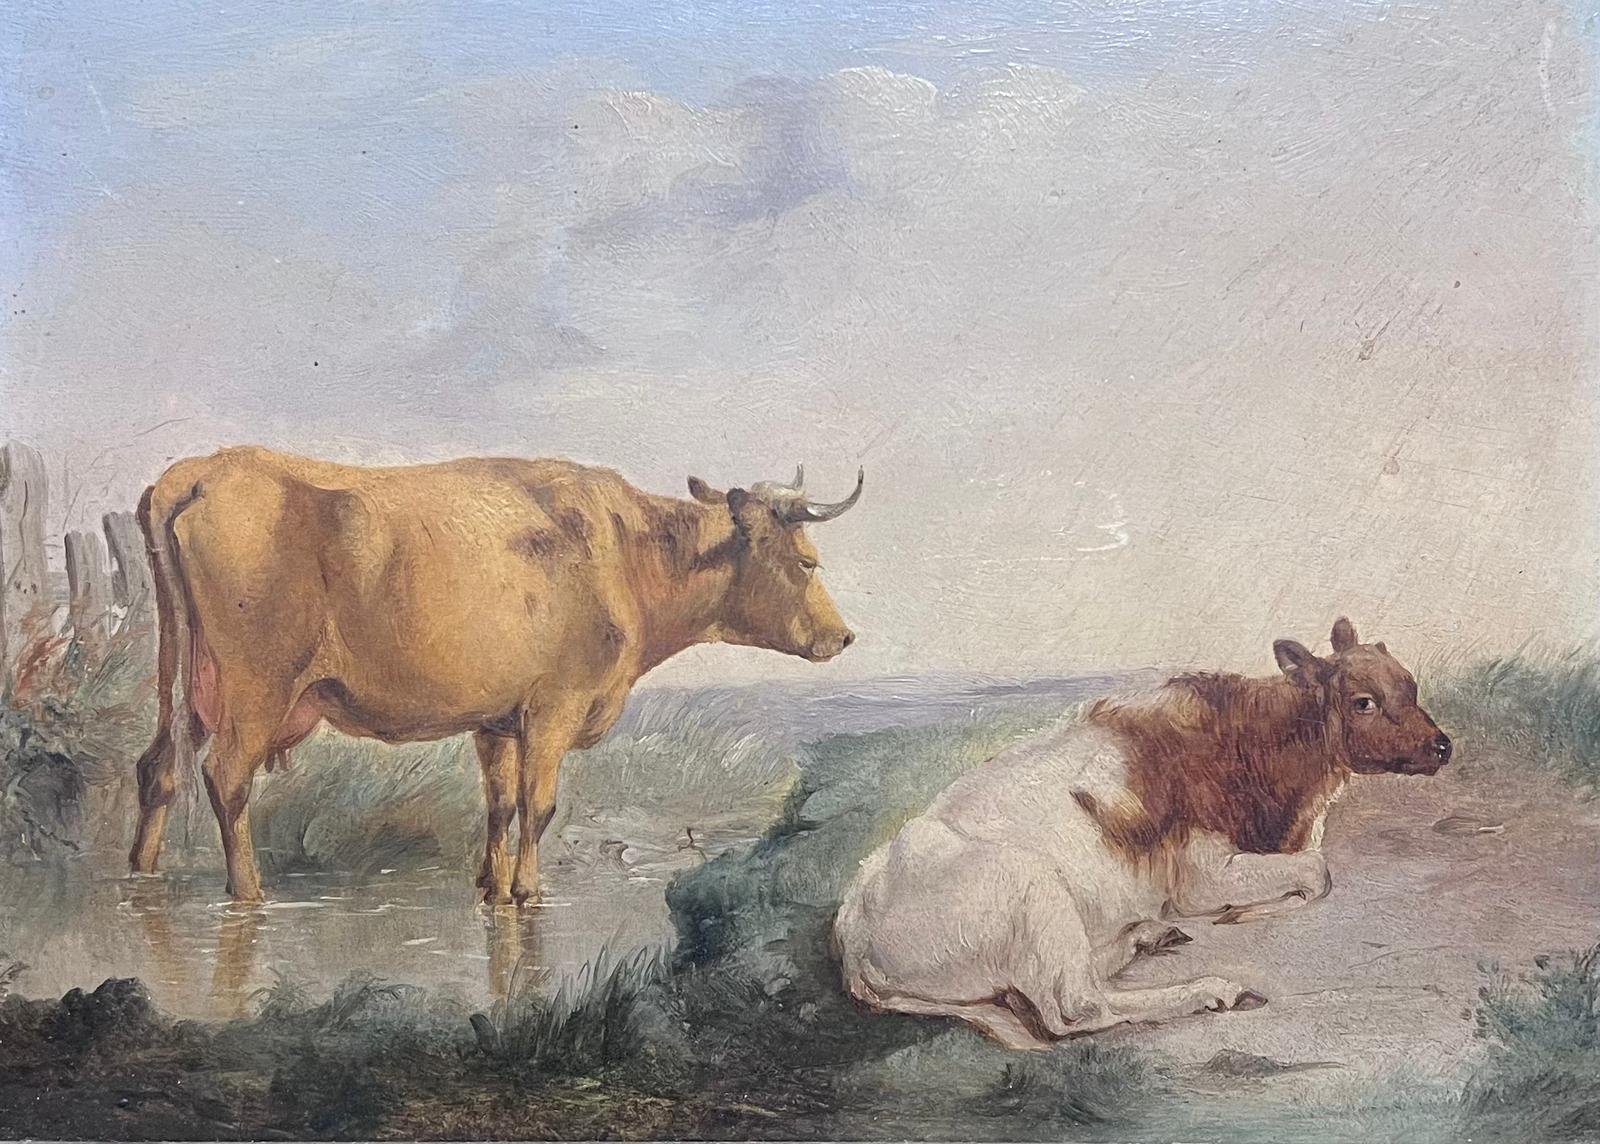 Cattle by Stream
English artist, late 19th century
inscribed on label verso
oil on board, framed
framed: 14 x 17 inches
board: 9.5 x 13 inches
provenance: private collection, England
condition: very good and sound condition; please note that the